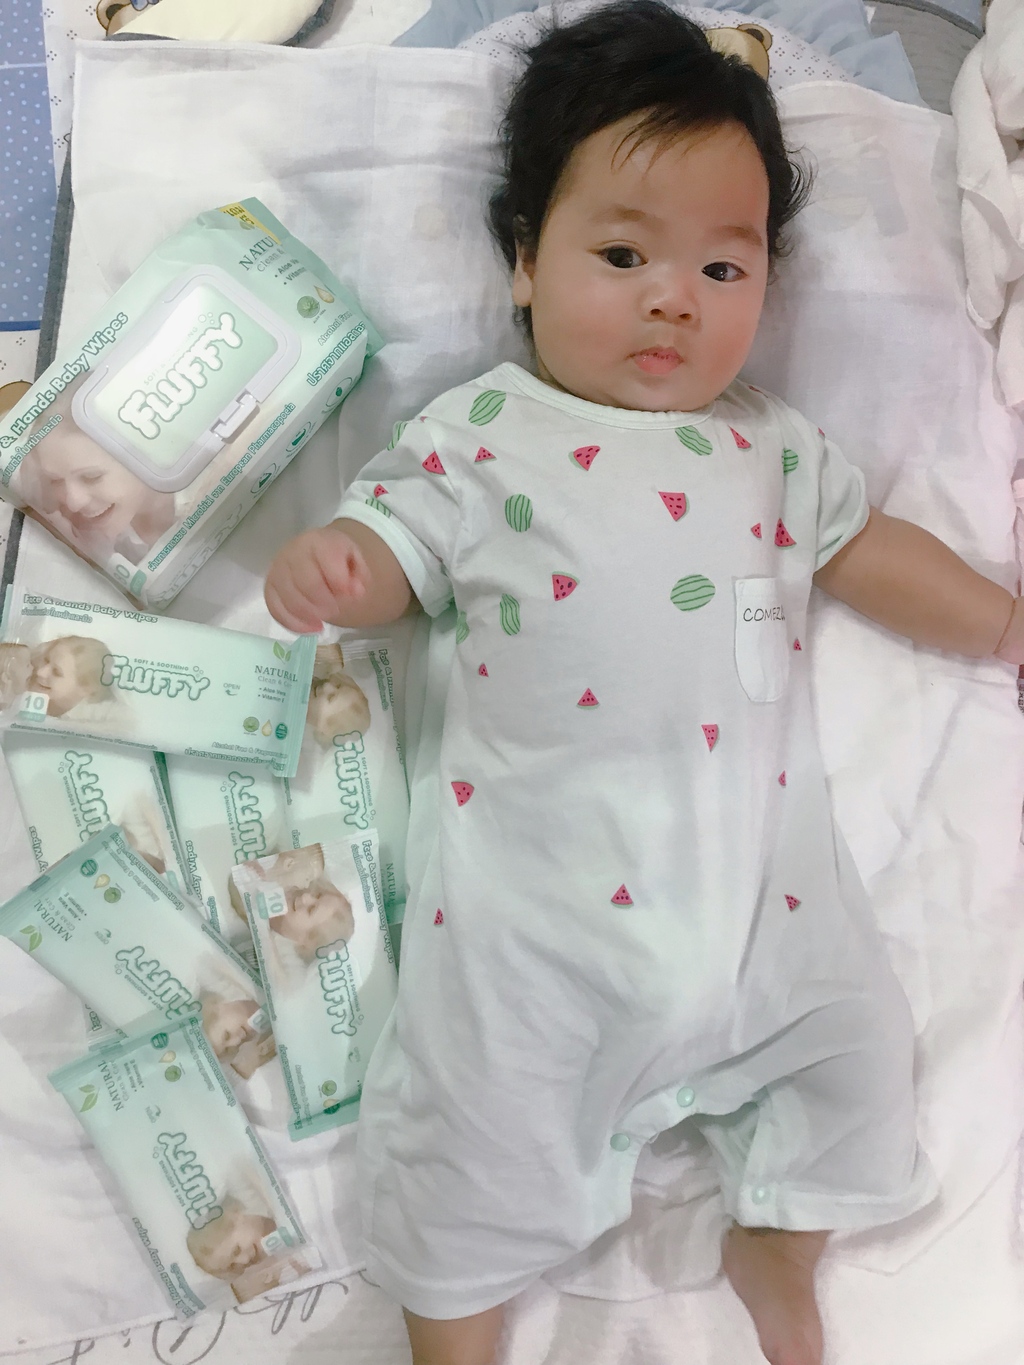 Fluffy Soft and Soothing ทิชชูเปียก รีวิว